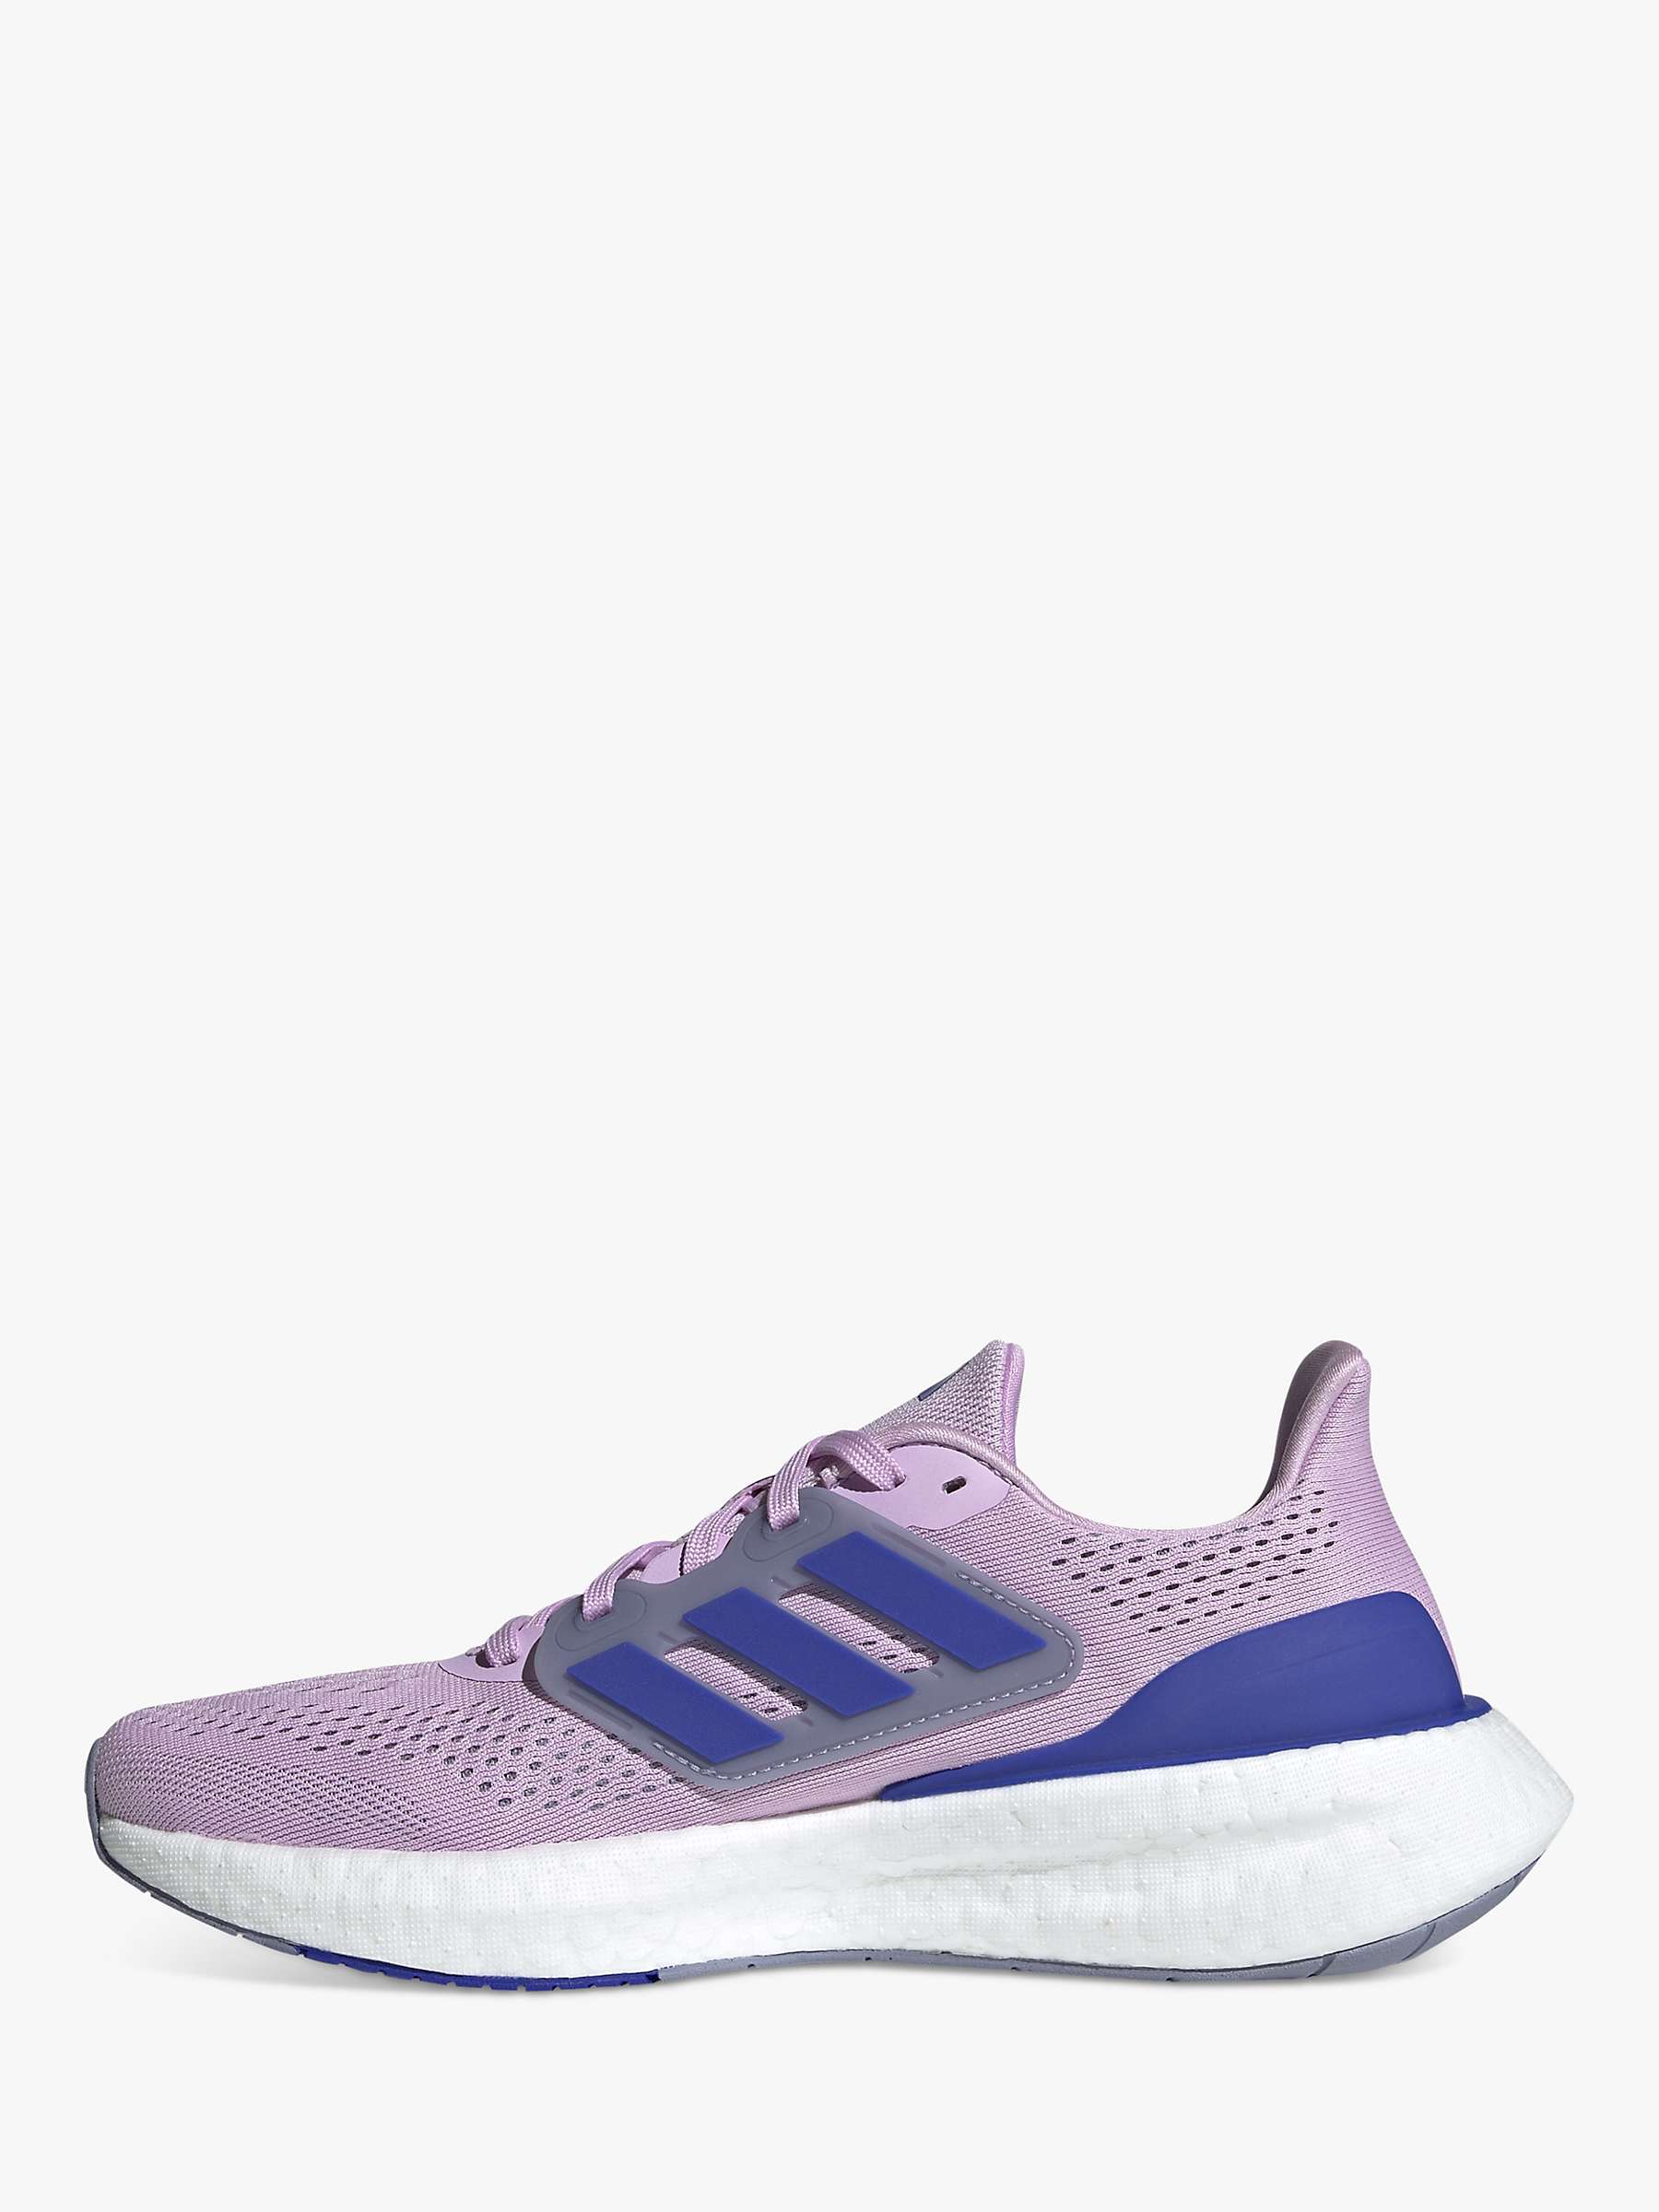 Buy adidas Pureboost 23 Running Shoes Online at johnlewis.com